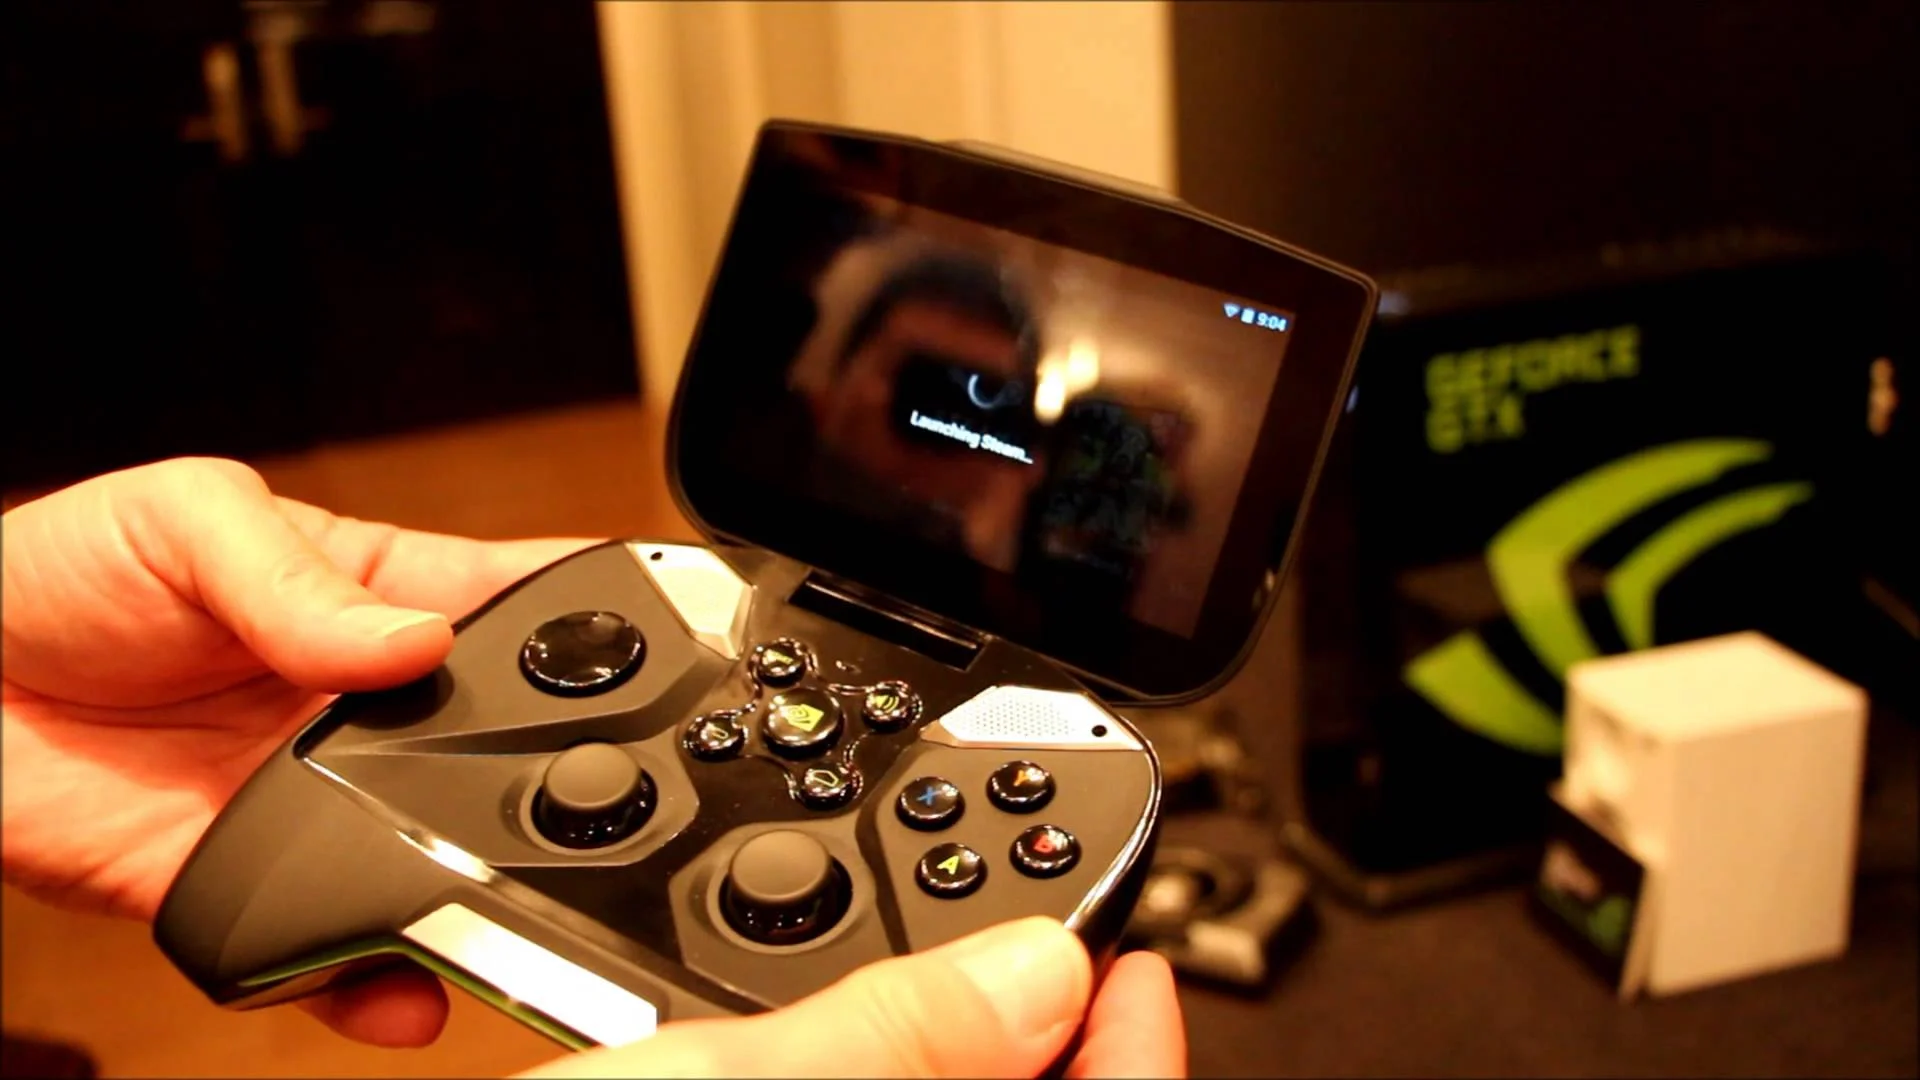 lowyat tv nvidia shield android gameplay and pc games streaming demo computex 2013